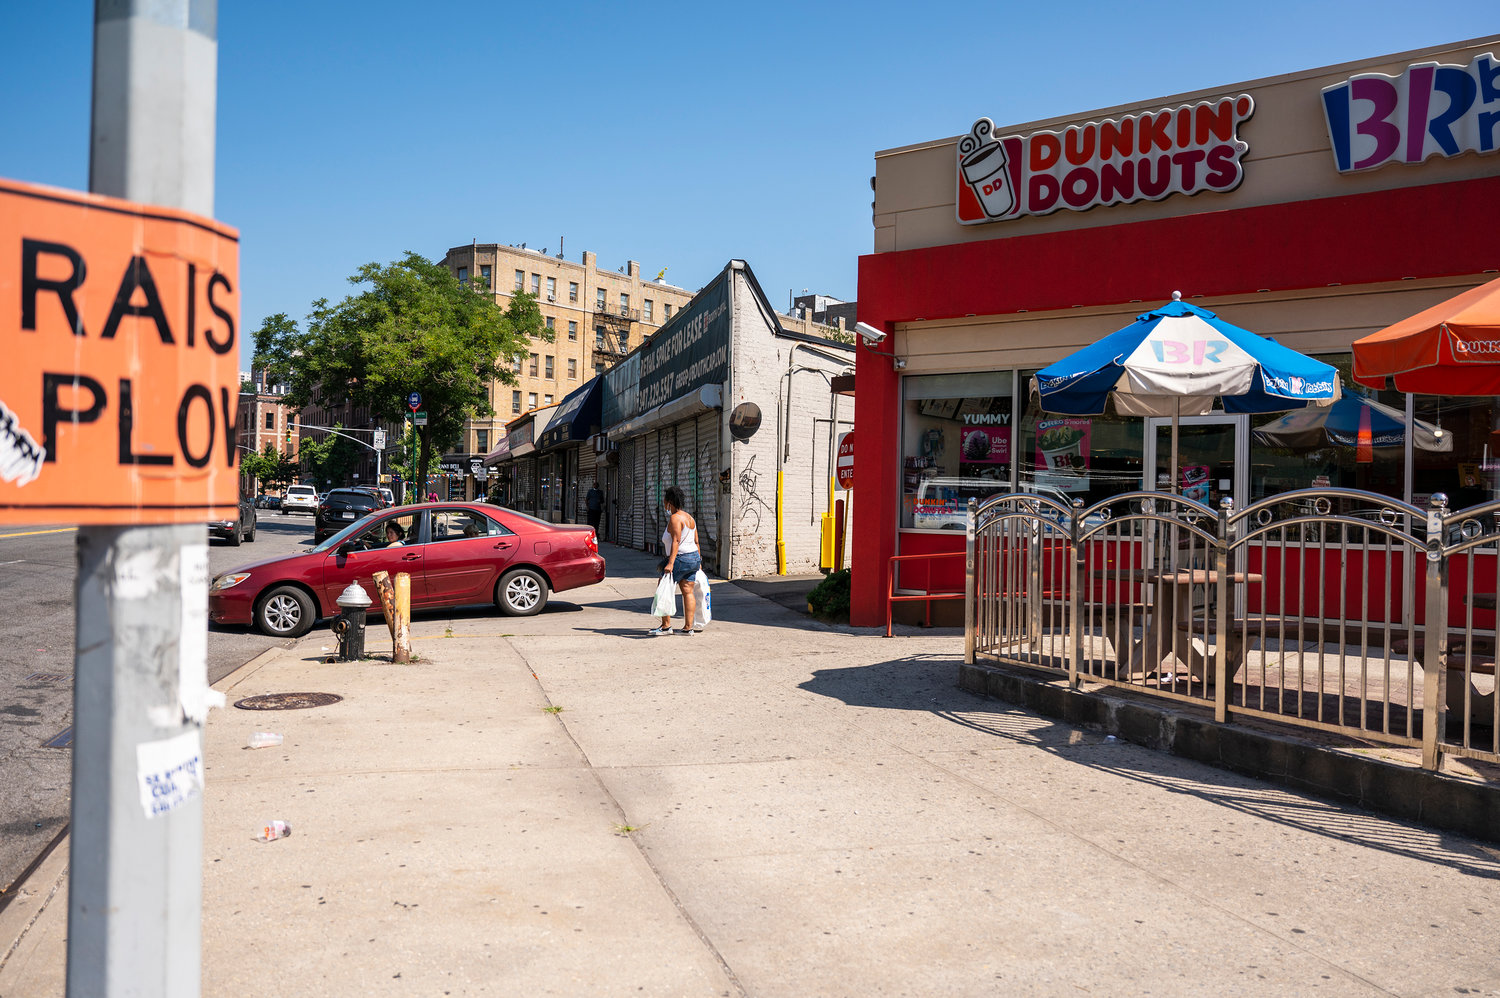 Storefront on West 230th Street near the 1 train are located on a block currently zoned for commercial and office use. But some of that could change, if Mayor Eric Adams gets his way.